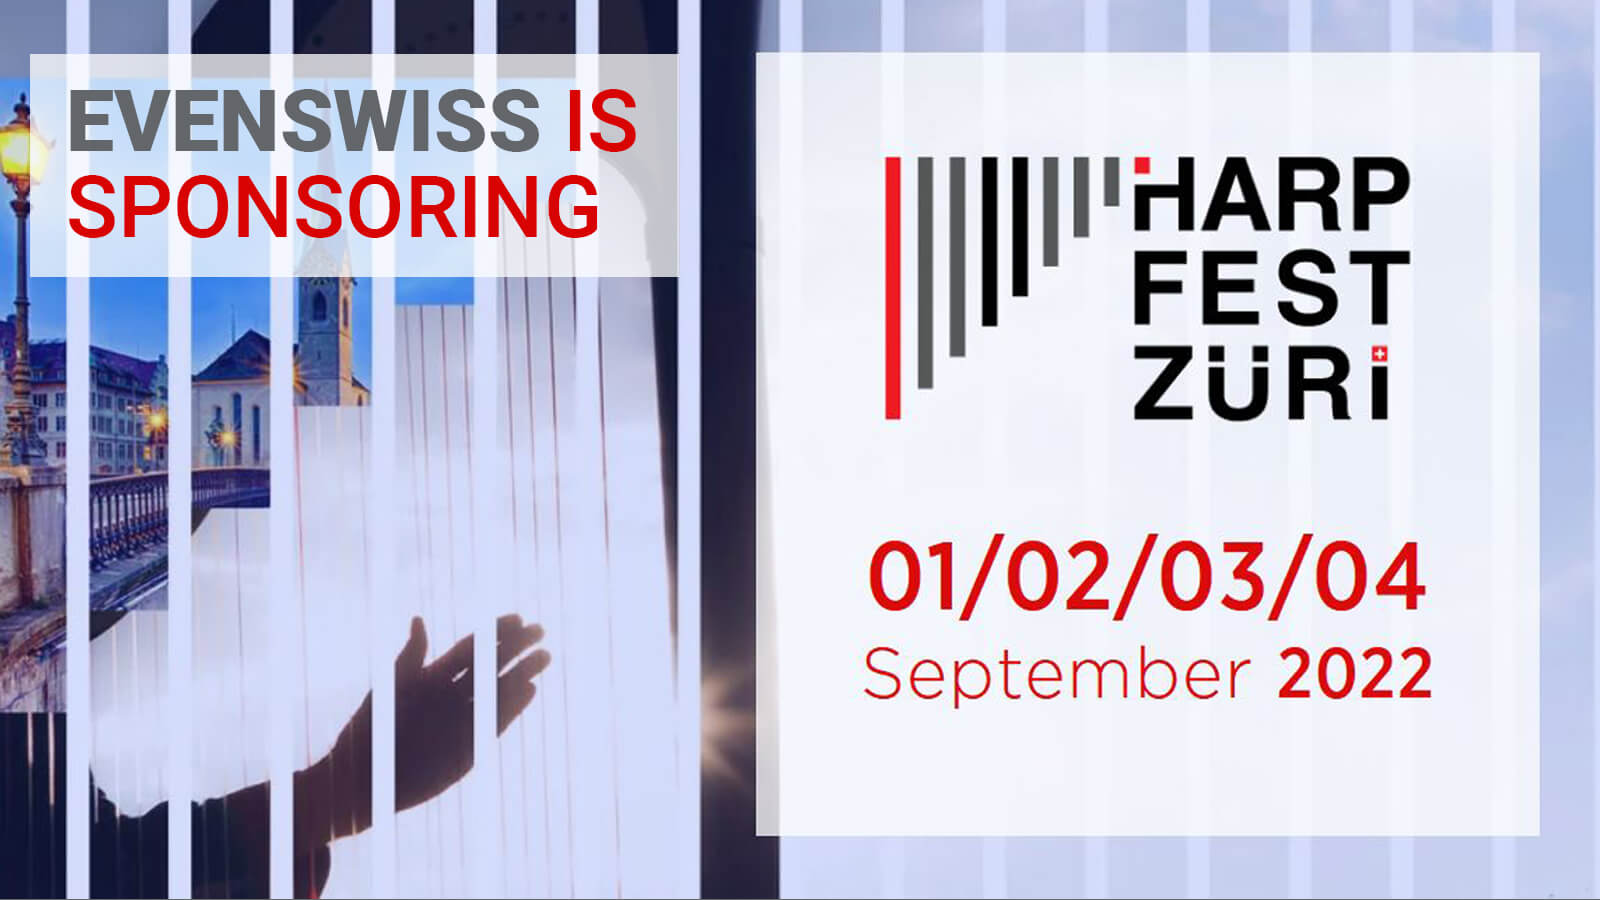 Evenswiss is official partner of Harp Festival Zurich 2022